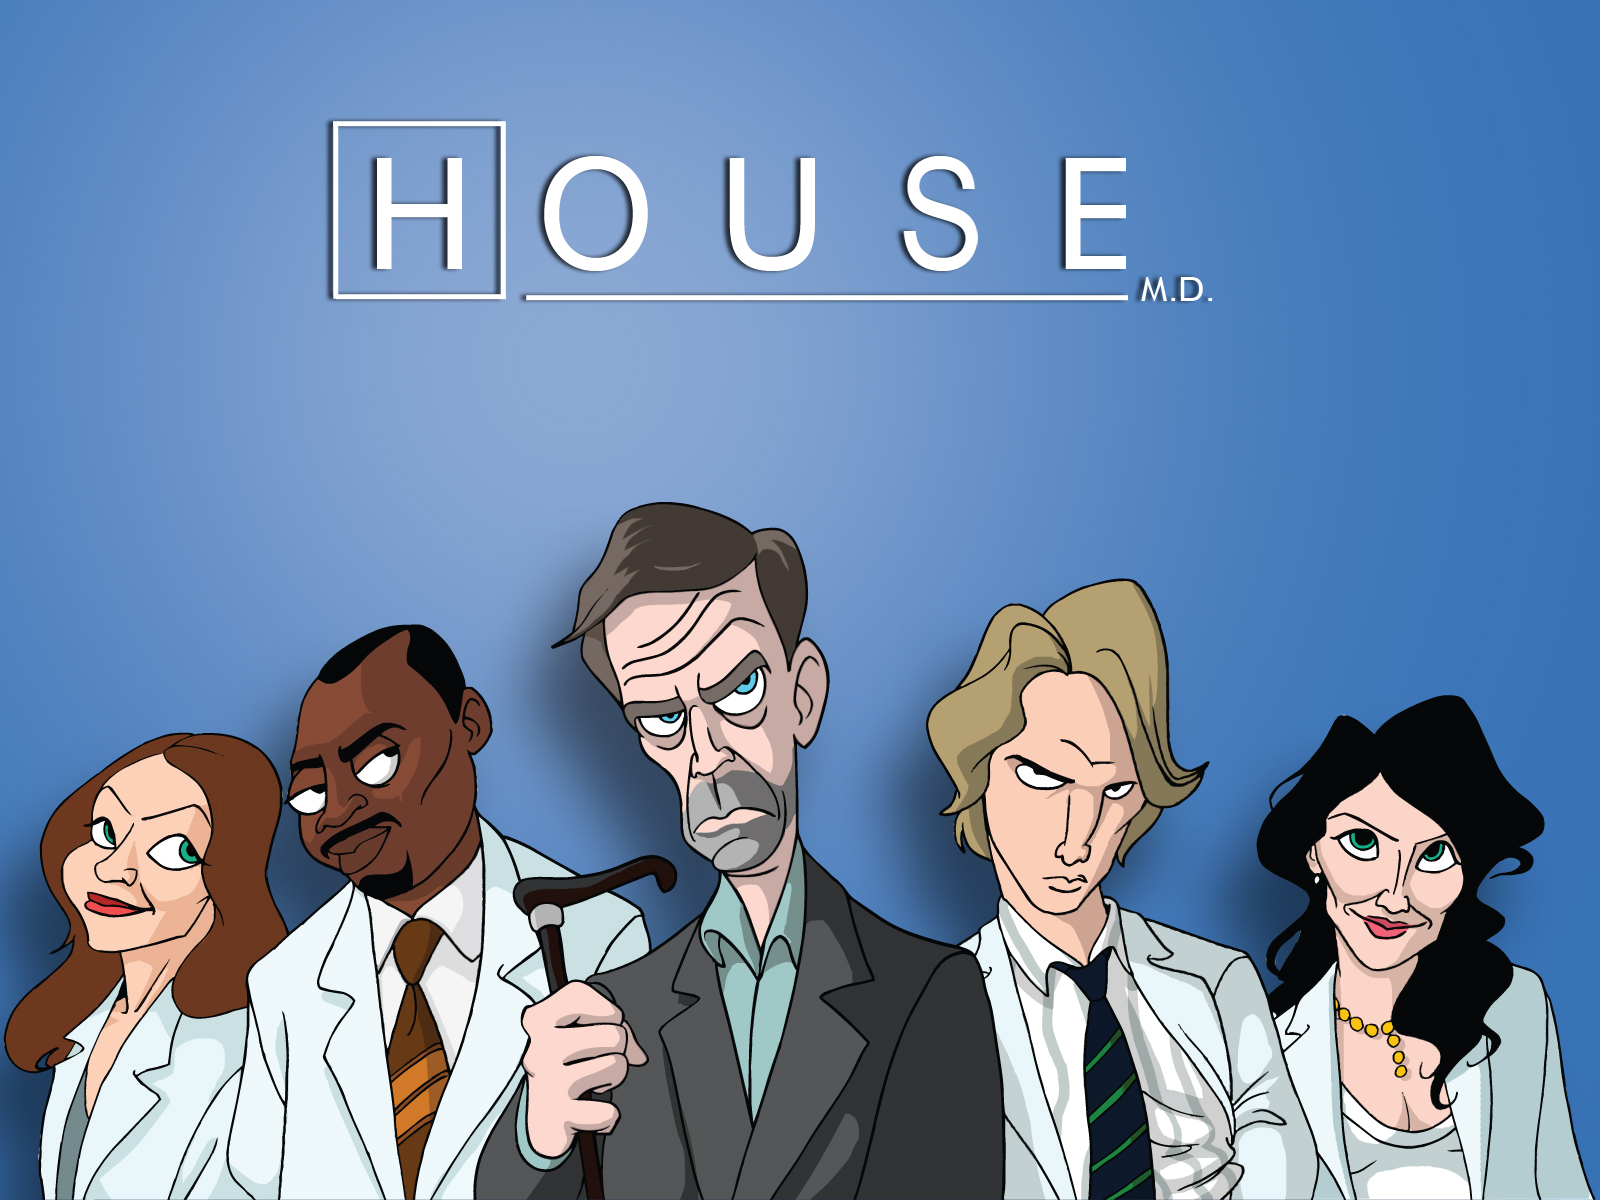 House MD Cast featuring Gregory House, Lisa Cuddy, Eric Foreman, Robert Chase, and Allison Cameron.